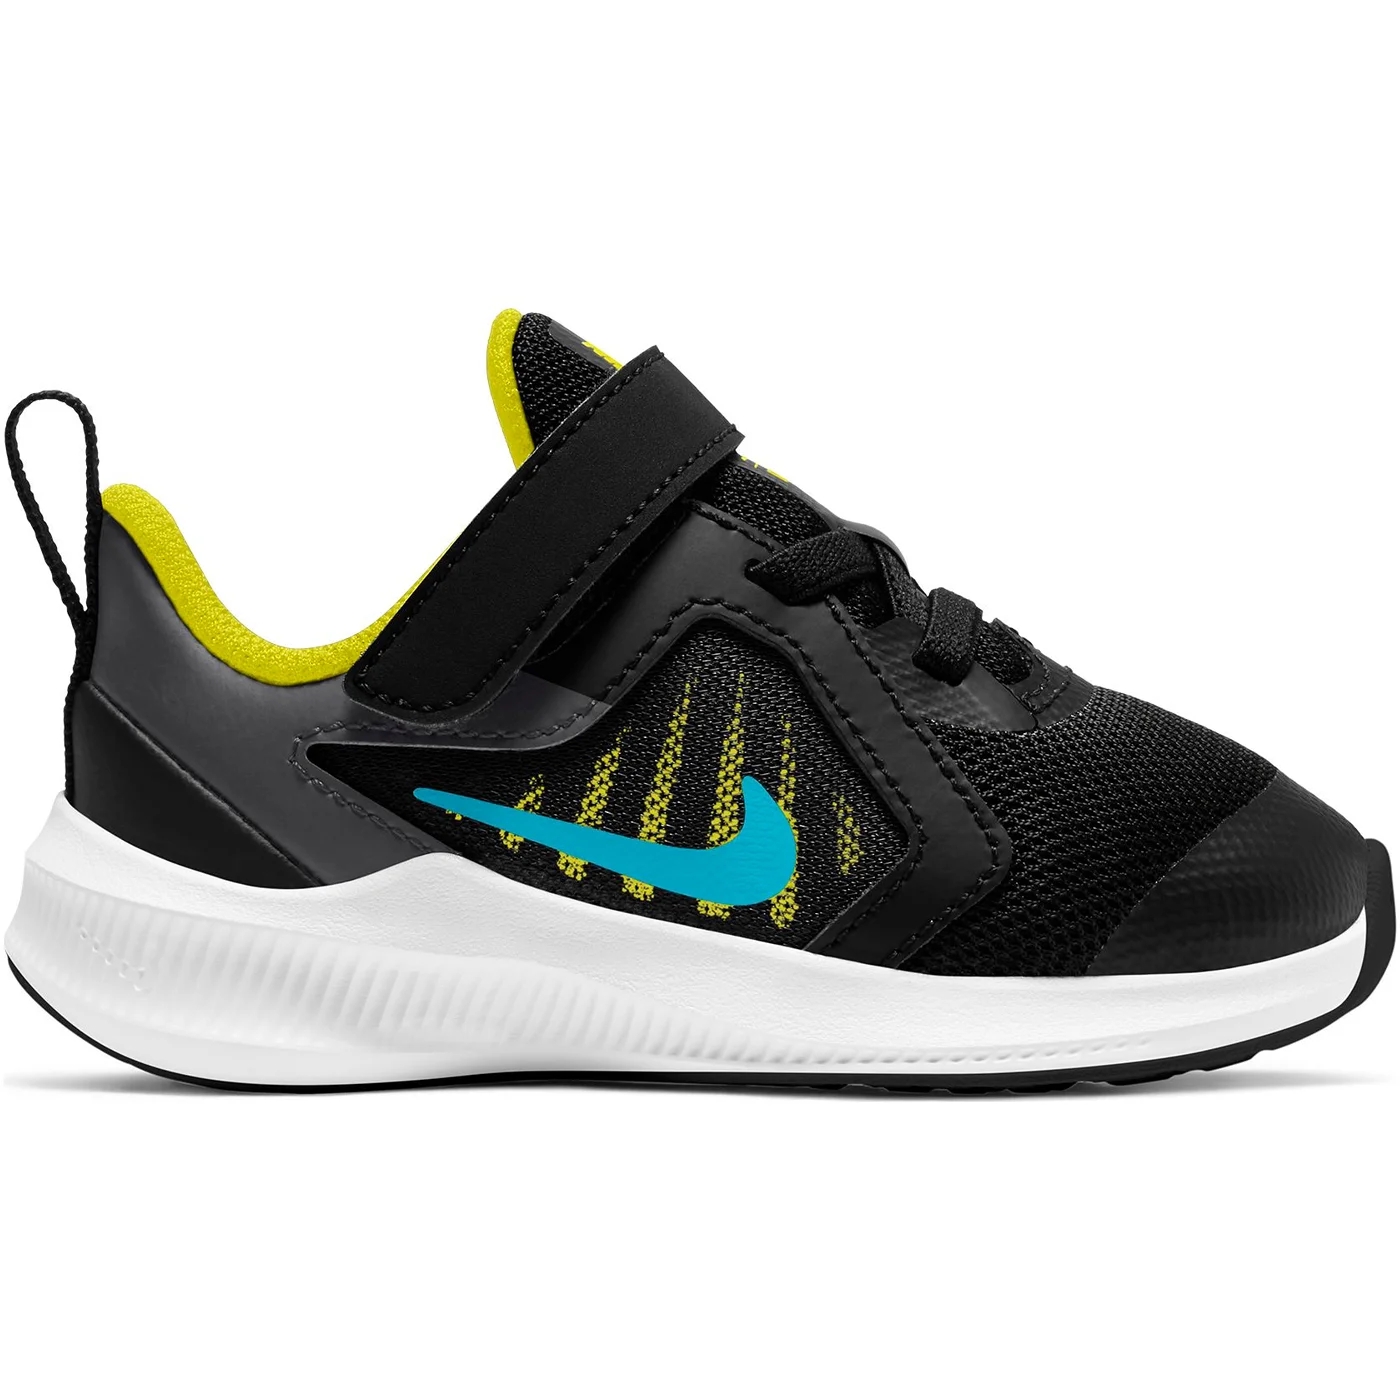 NIKE LIFESTYLE - SCHUHE KINDER - SNEAKERS DOWNSHIFTER 10 KIDS (TDV) LIFESTYLE - SCHUHE KINDER - BLACK/CHLORINE BLUE-HIGH VOLTA 8mPxyid8